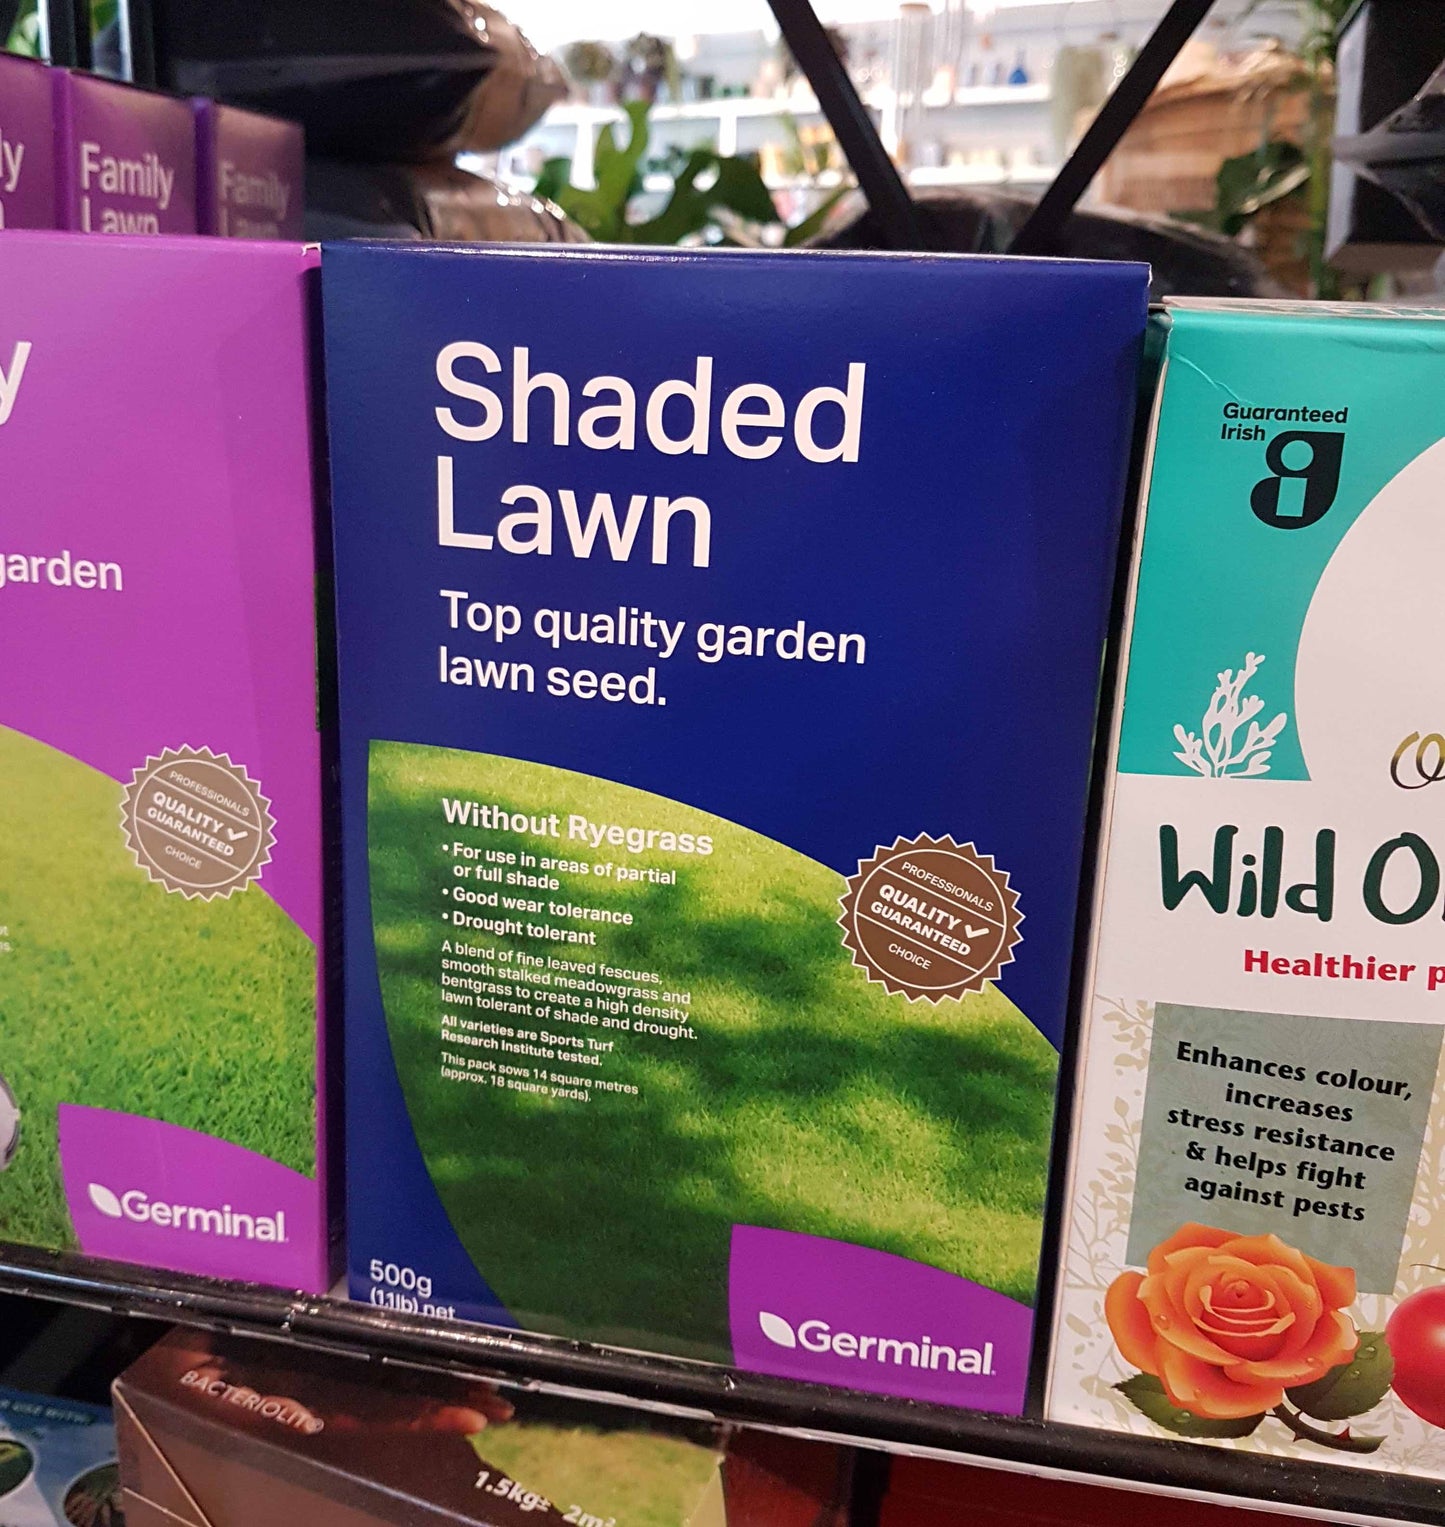 Shaded lawn seed